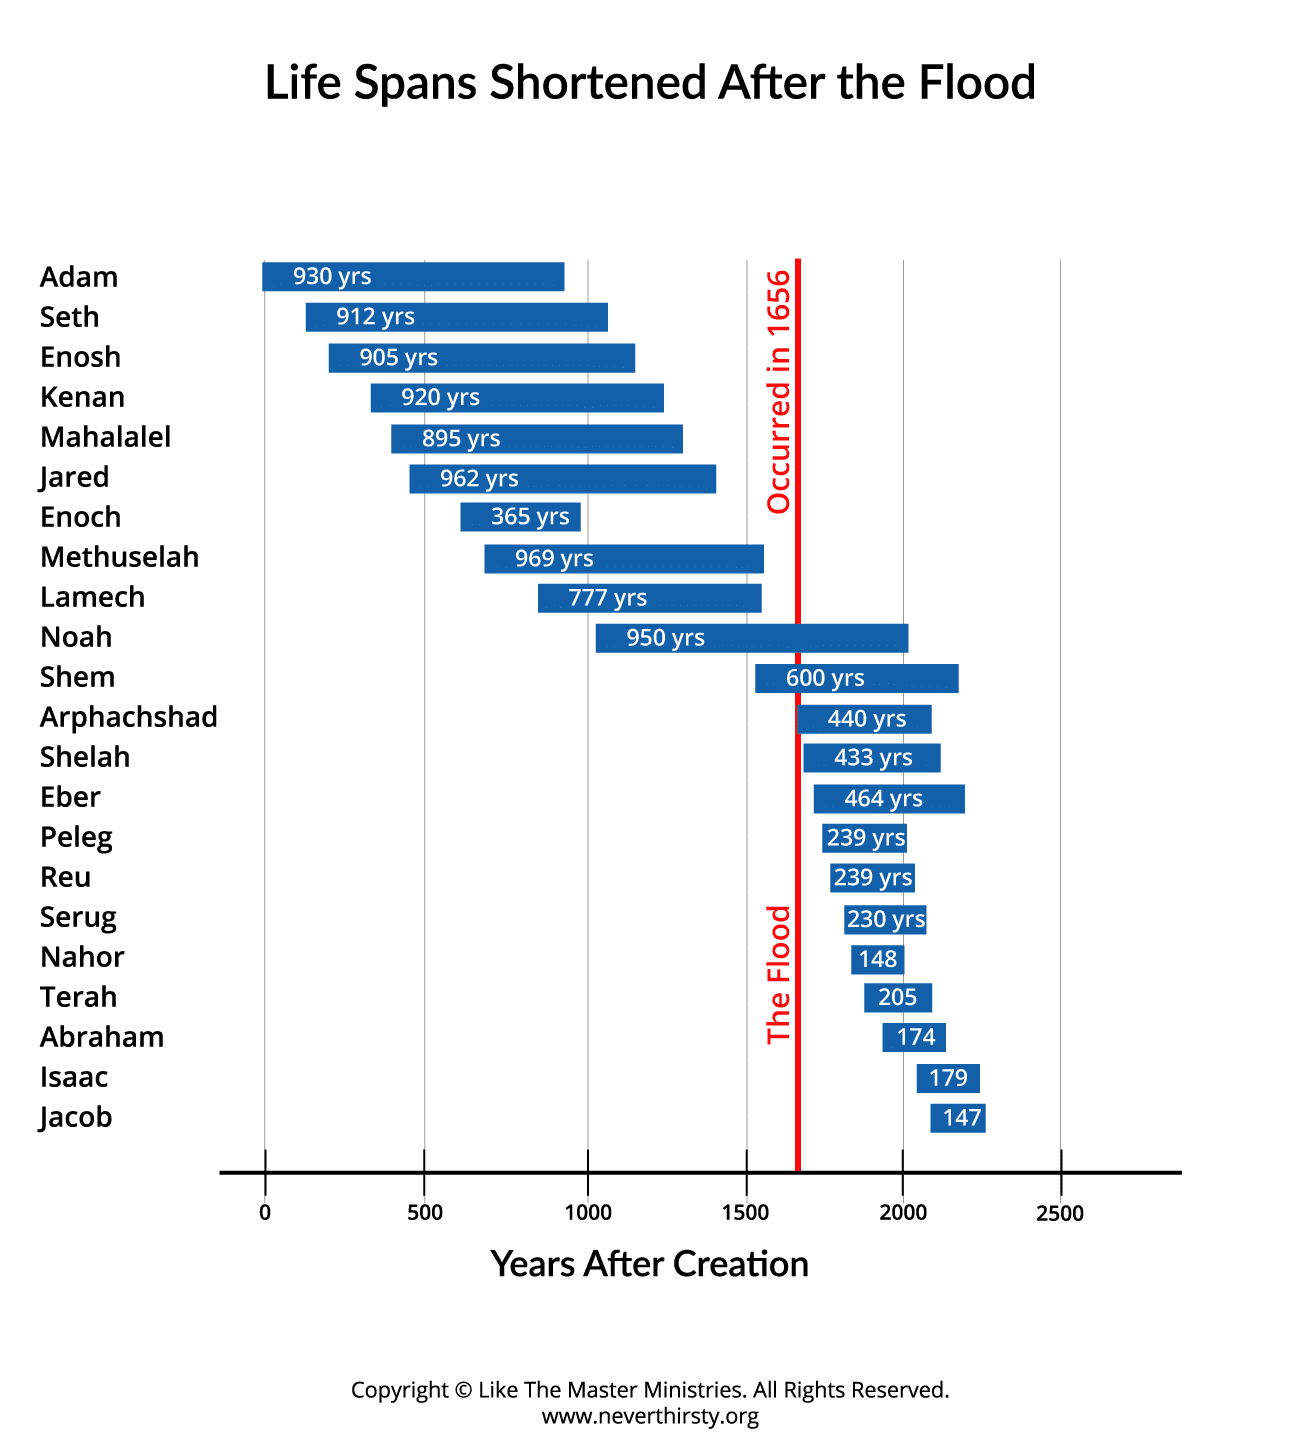 Life Spans were Shortened After the Flood